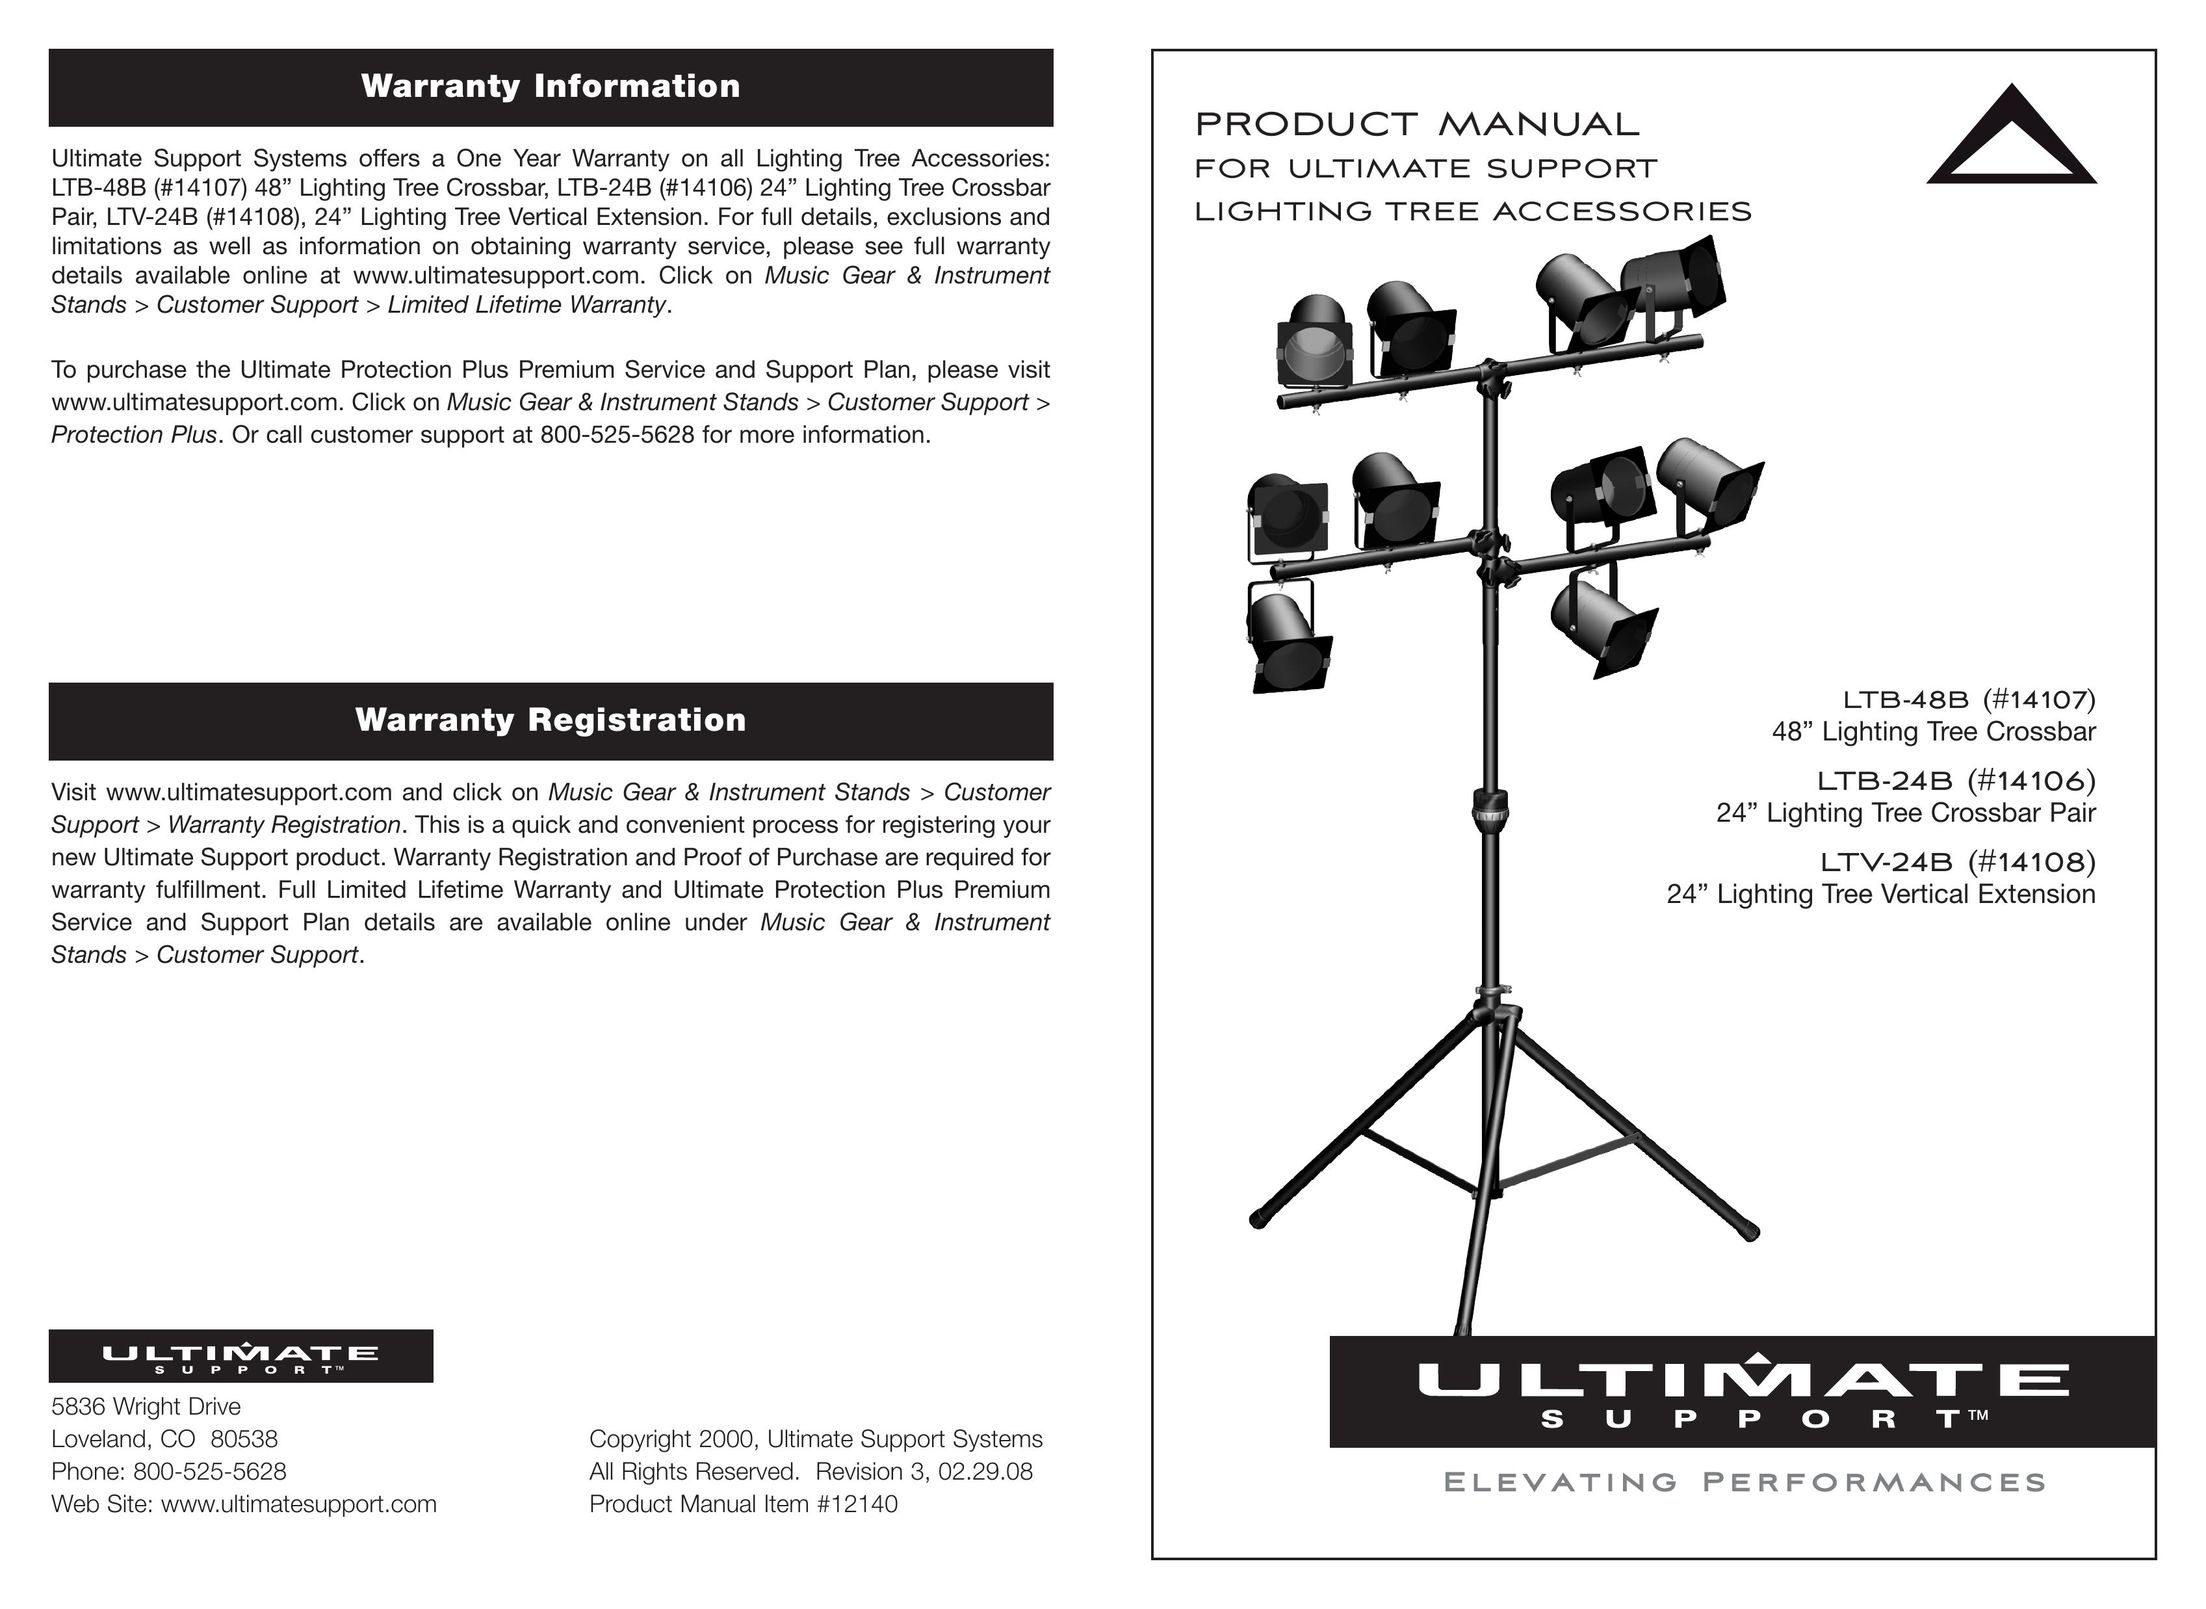 Ultimate Support Systems LTB-48B Indoor Furnishings User Manual